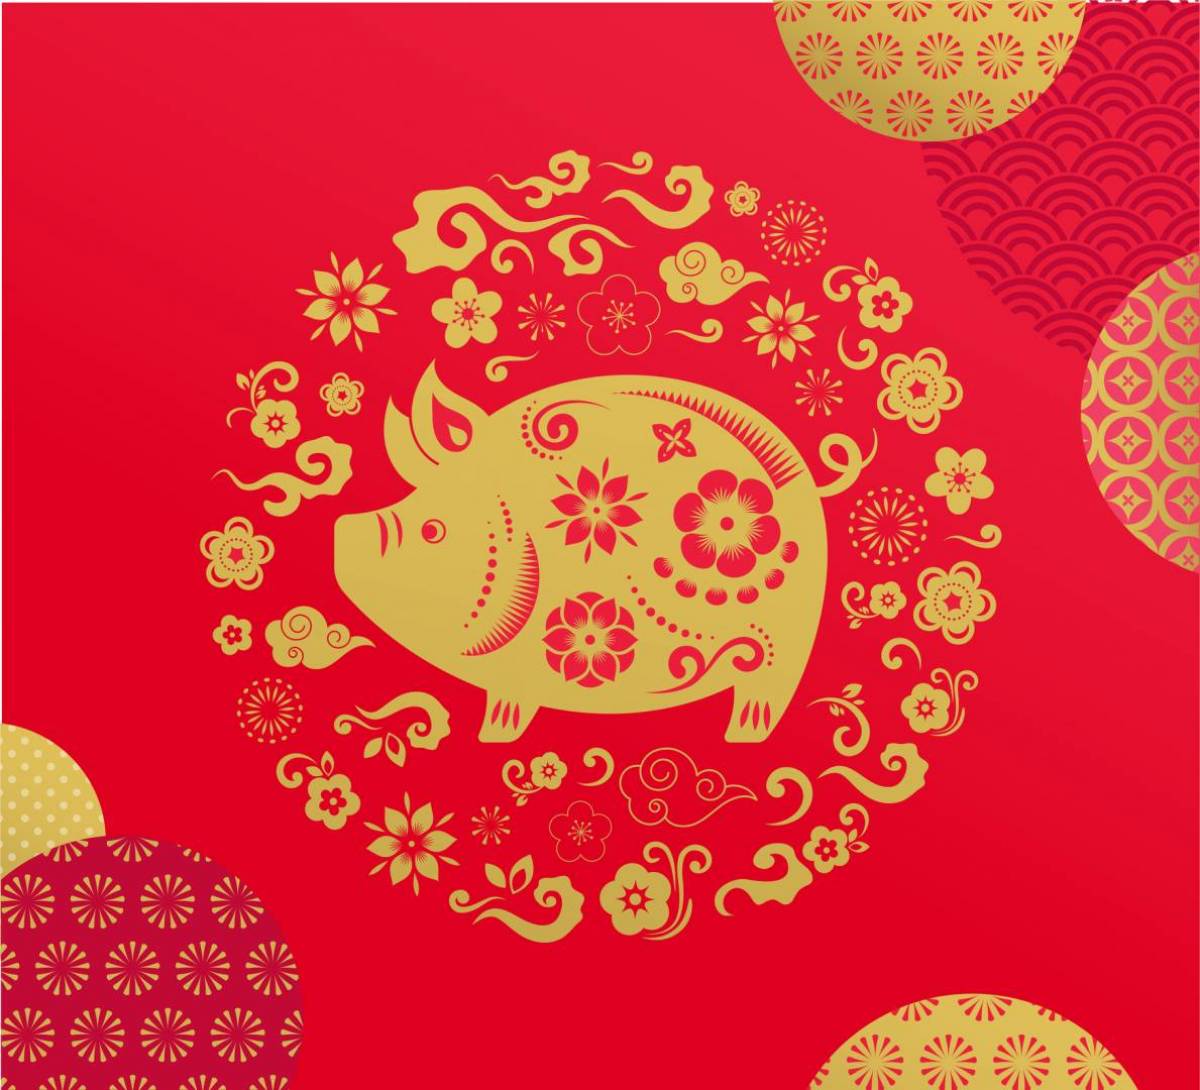 Lunar New Year 2019: Say hello to Year of the Pig ow.ly/Fw3v30nA6IV #LunarNewYear #LNY2019 #ChineseNewYear #CNY2019 #YearofthePig #Vancouver #MetroVancouver